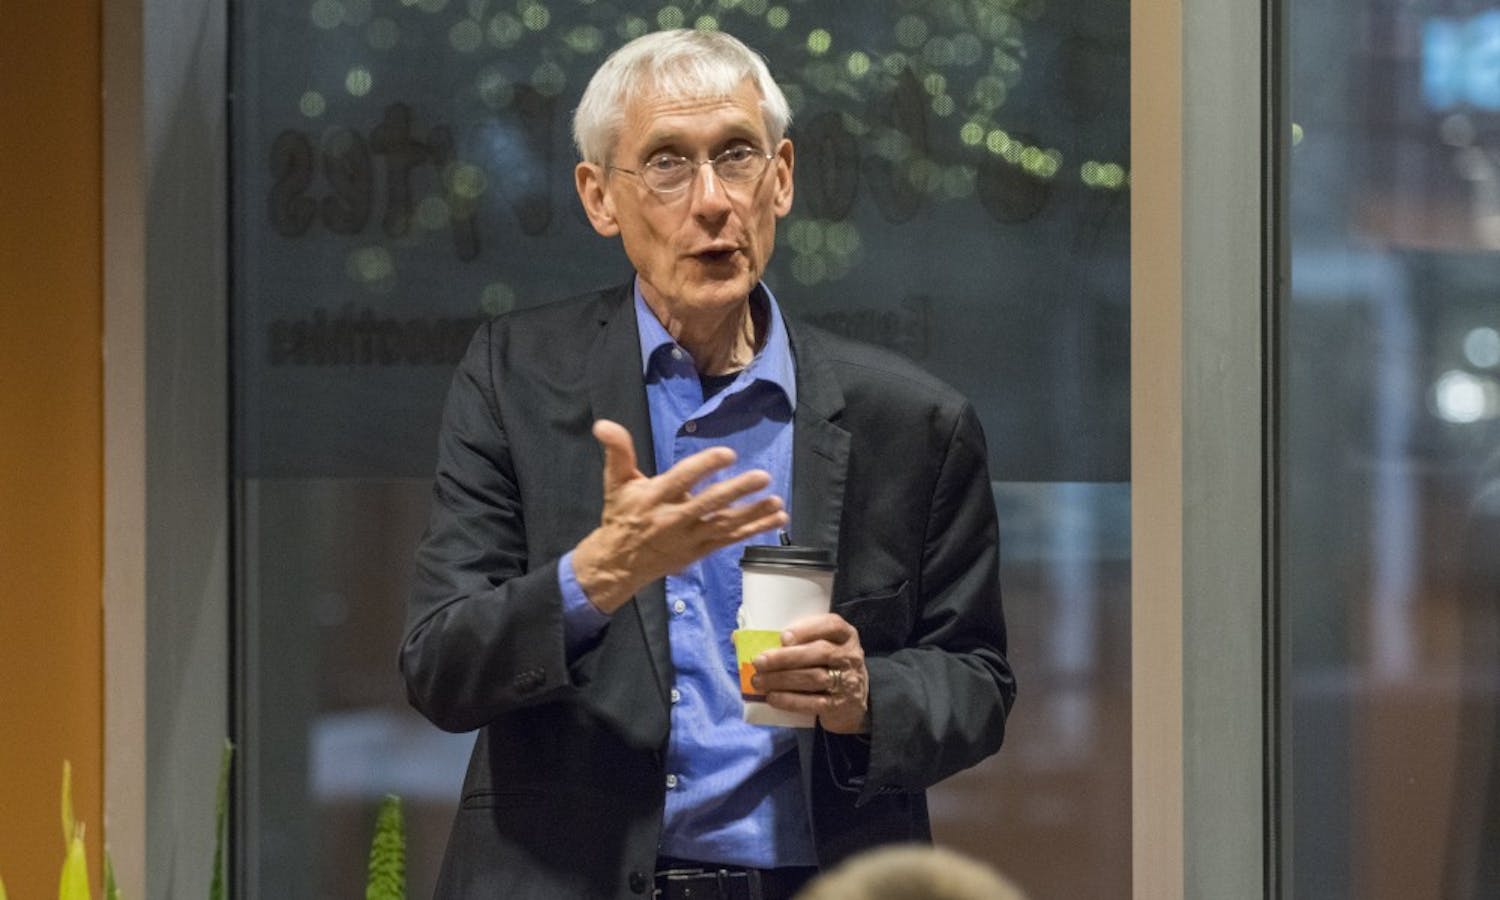 Democratic gubernatorial candidate Tony Evers talked to students about issues facing them at Coffee Bytes on Tuesday, as a part of the College Democrats’ new event series Coffee with Candidates.